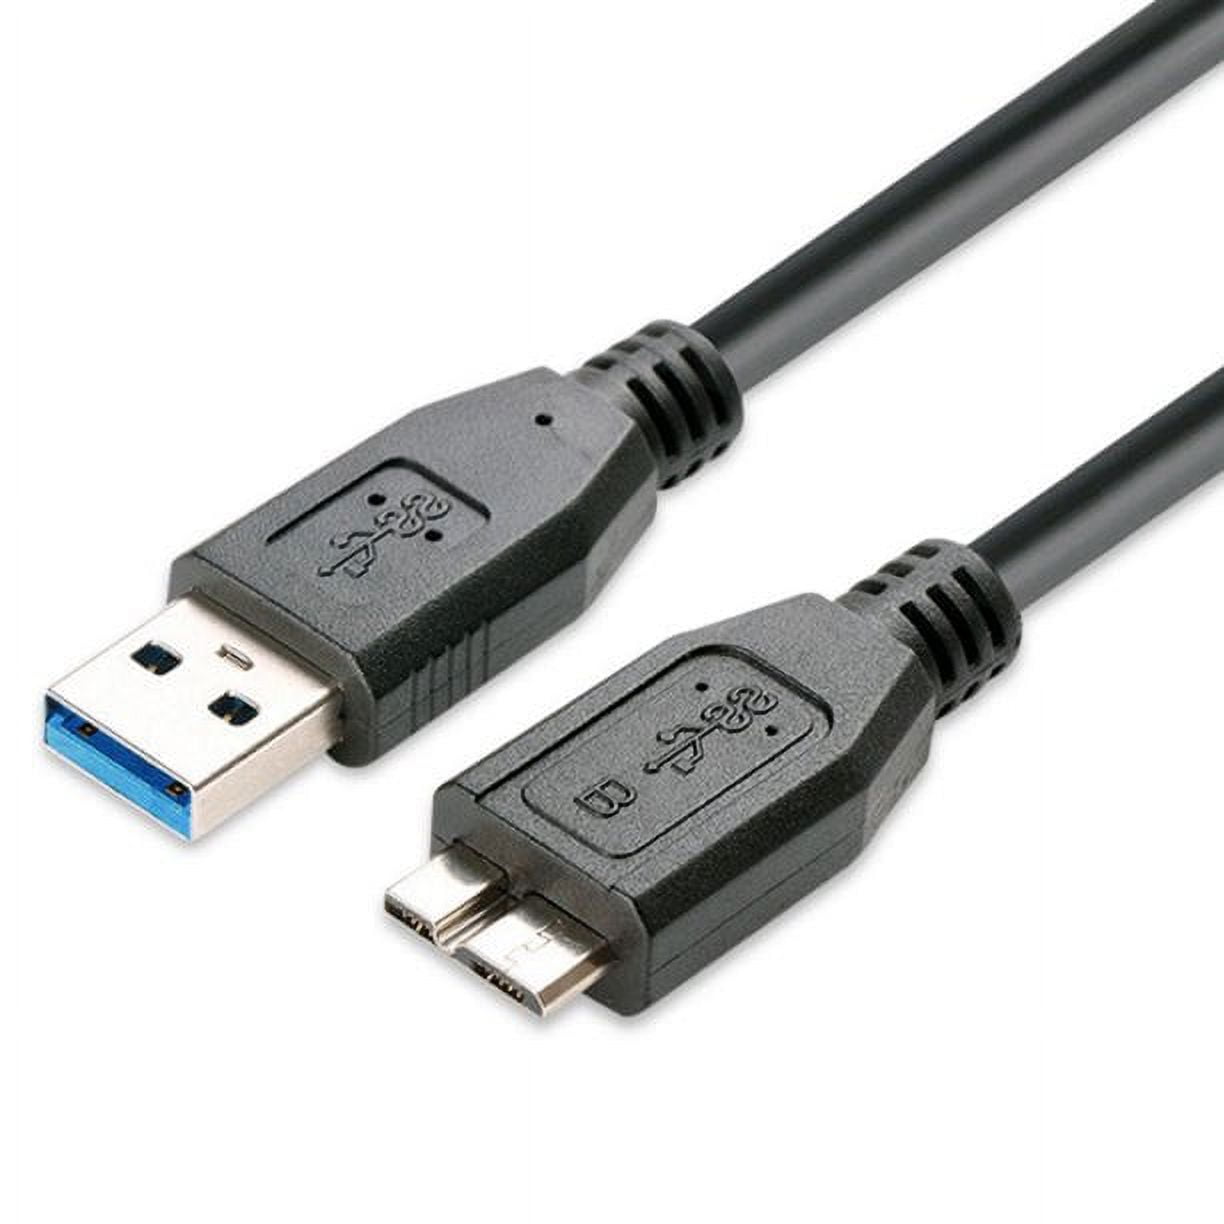 Dual USB 3.0 Type A to Micro-B USB Y Shape High Speed Cable for External  Hard Drives/Seagate/Toshiba/WD/Hitachi/Samsung/Wii-U/Note 3 (21 Inches) 